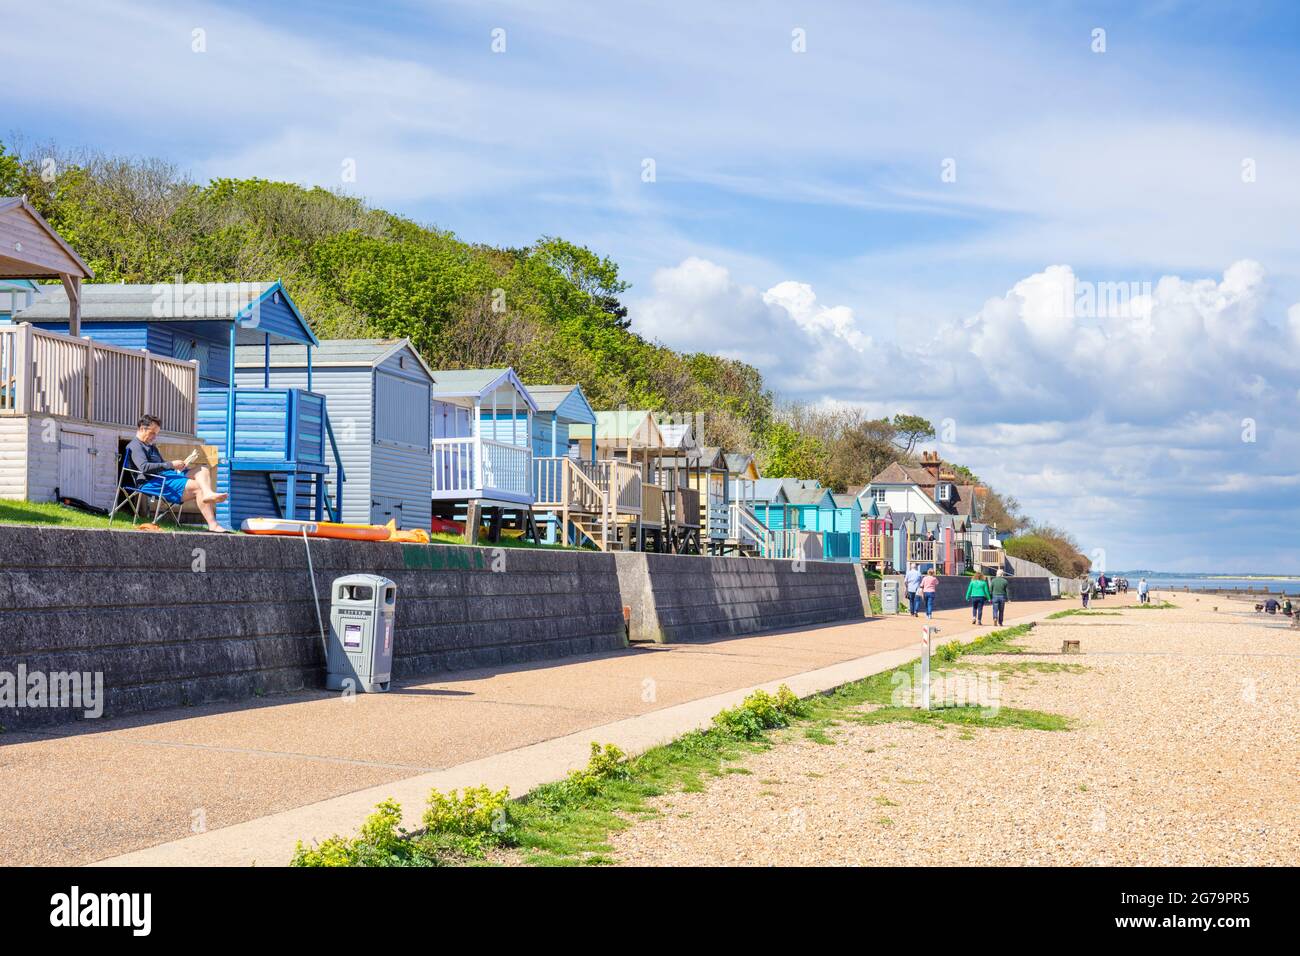 Colourful rows of wooden huts,chalets or Whitstable beach huts on the grassy Tankerton slopes below Marine Parade Whitstable Kent England UK GB Europe Stock Photo